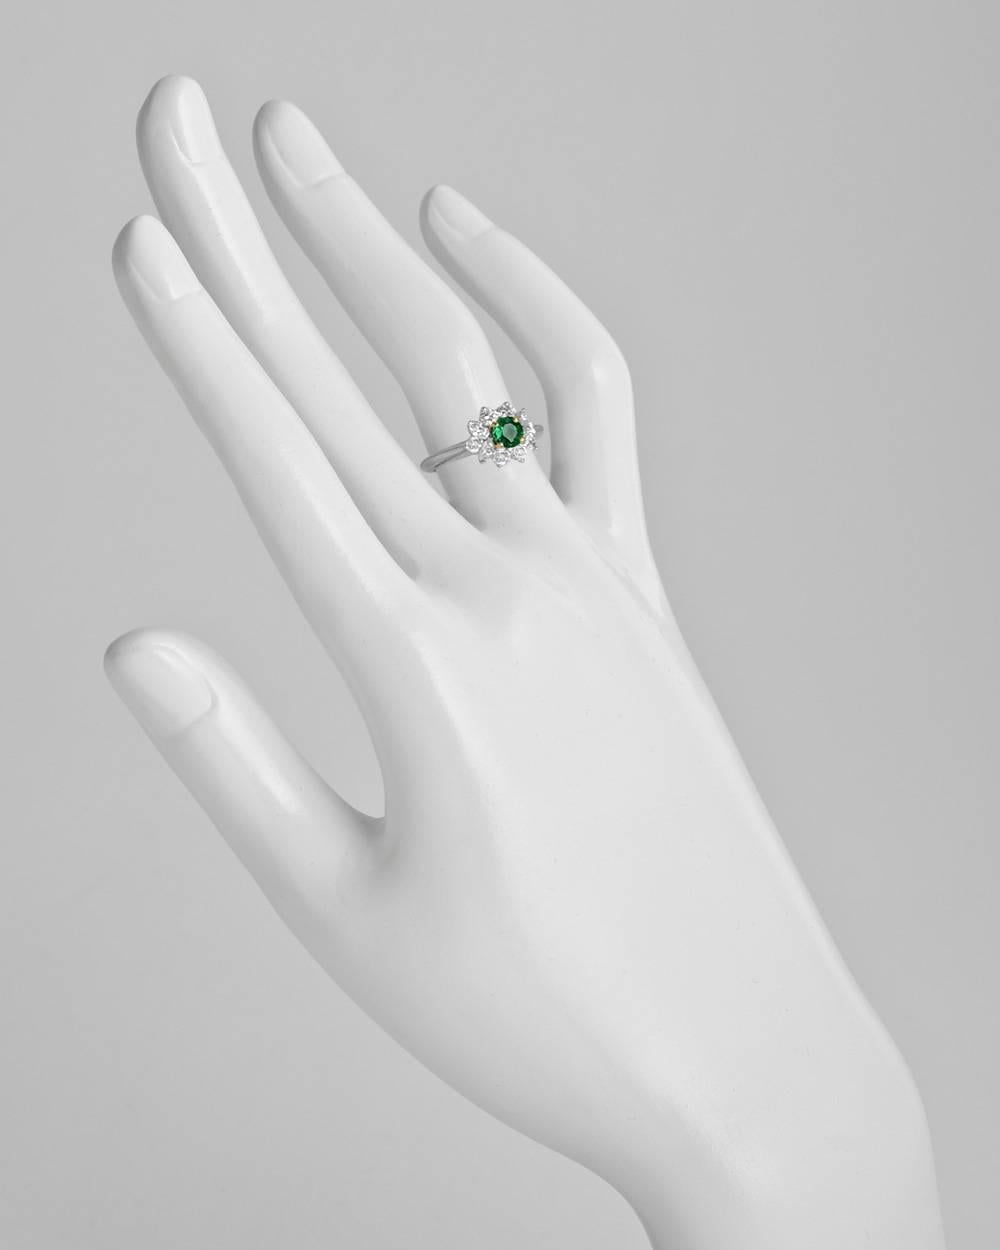 Emerald and diamond cluster ring, centering a circular-cut emerald weighing approximately 0.32 carats, surrounded by six round and four marquise-shaped diamonds, the diamonds altogether weighing approximately 0.56 total carats (F color, VVS1-VVS2